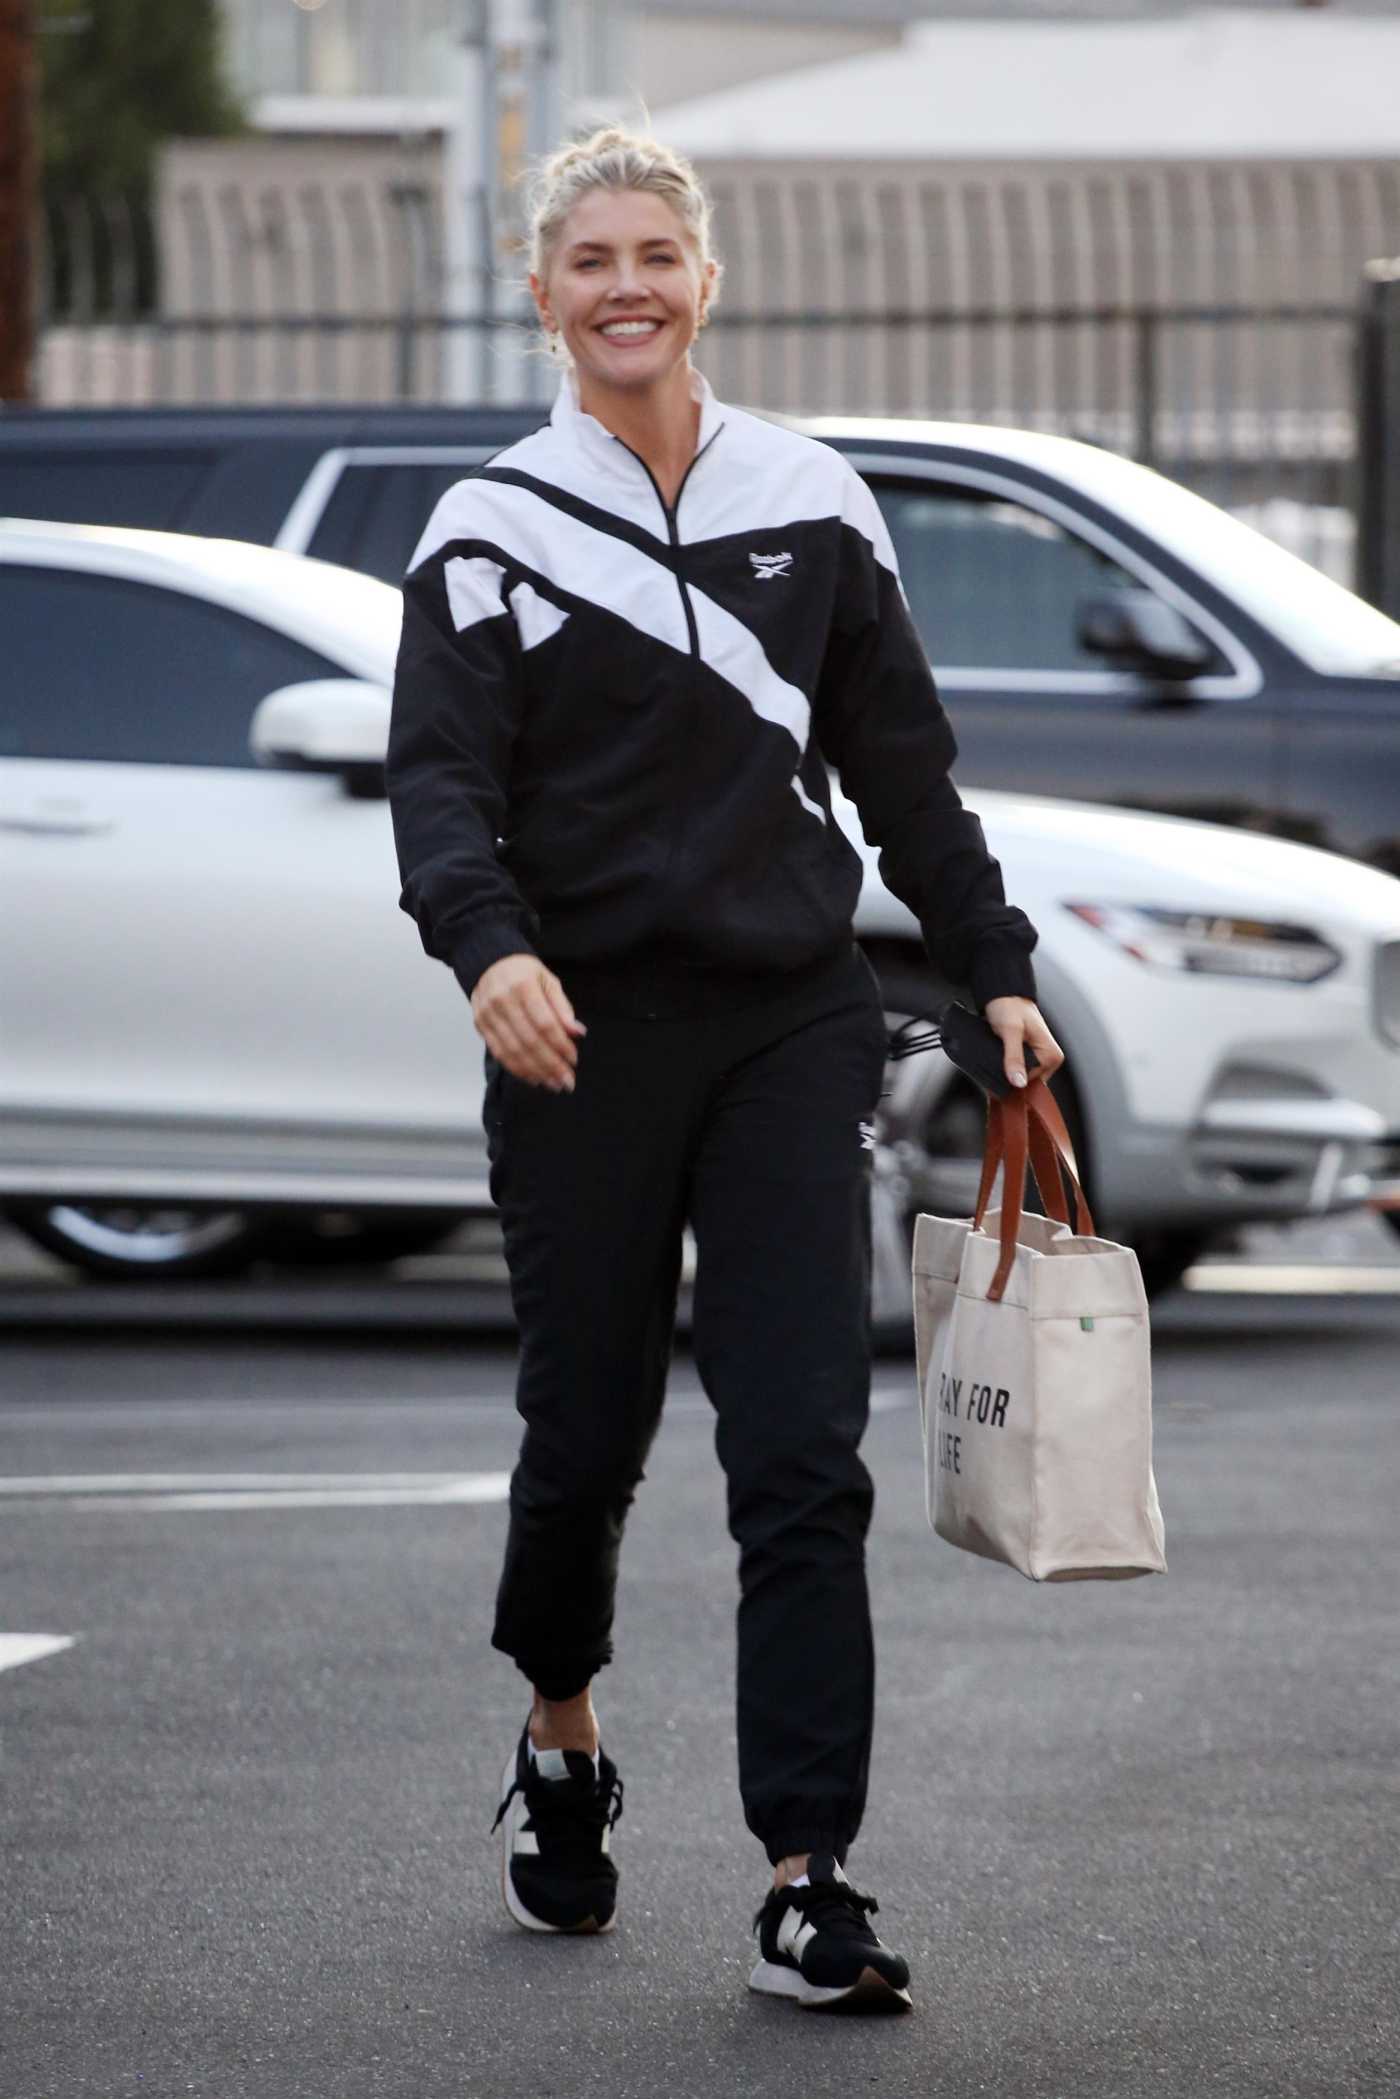 Amanda Kloots in a Black and White Tracksuit Arrives for Practice at The Dancing With The Stars Rehearsal Studio in Los Angeles 10/10/2021